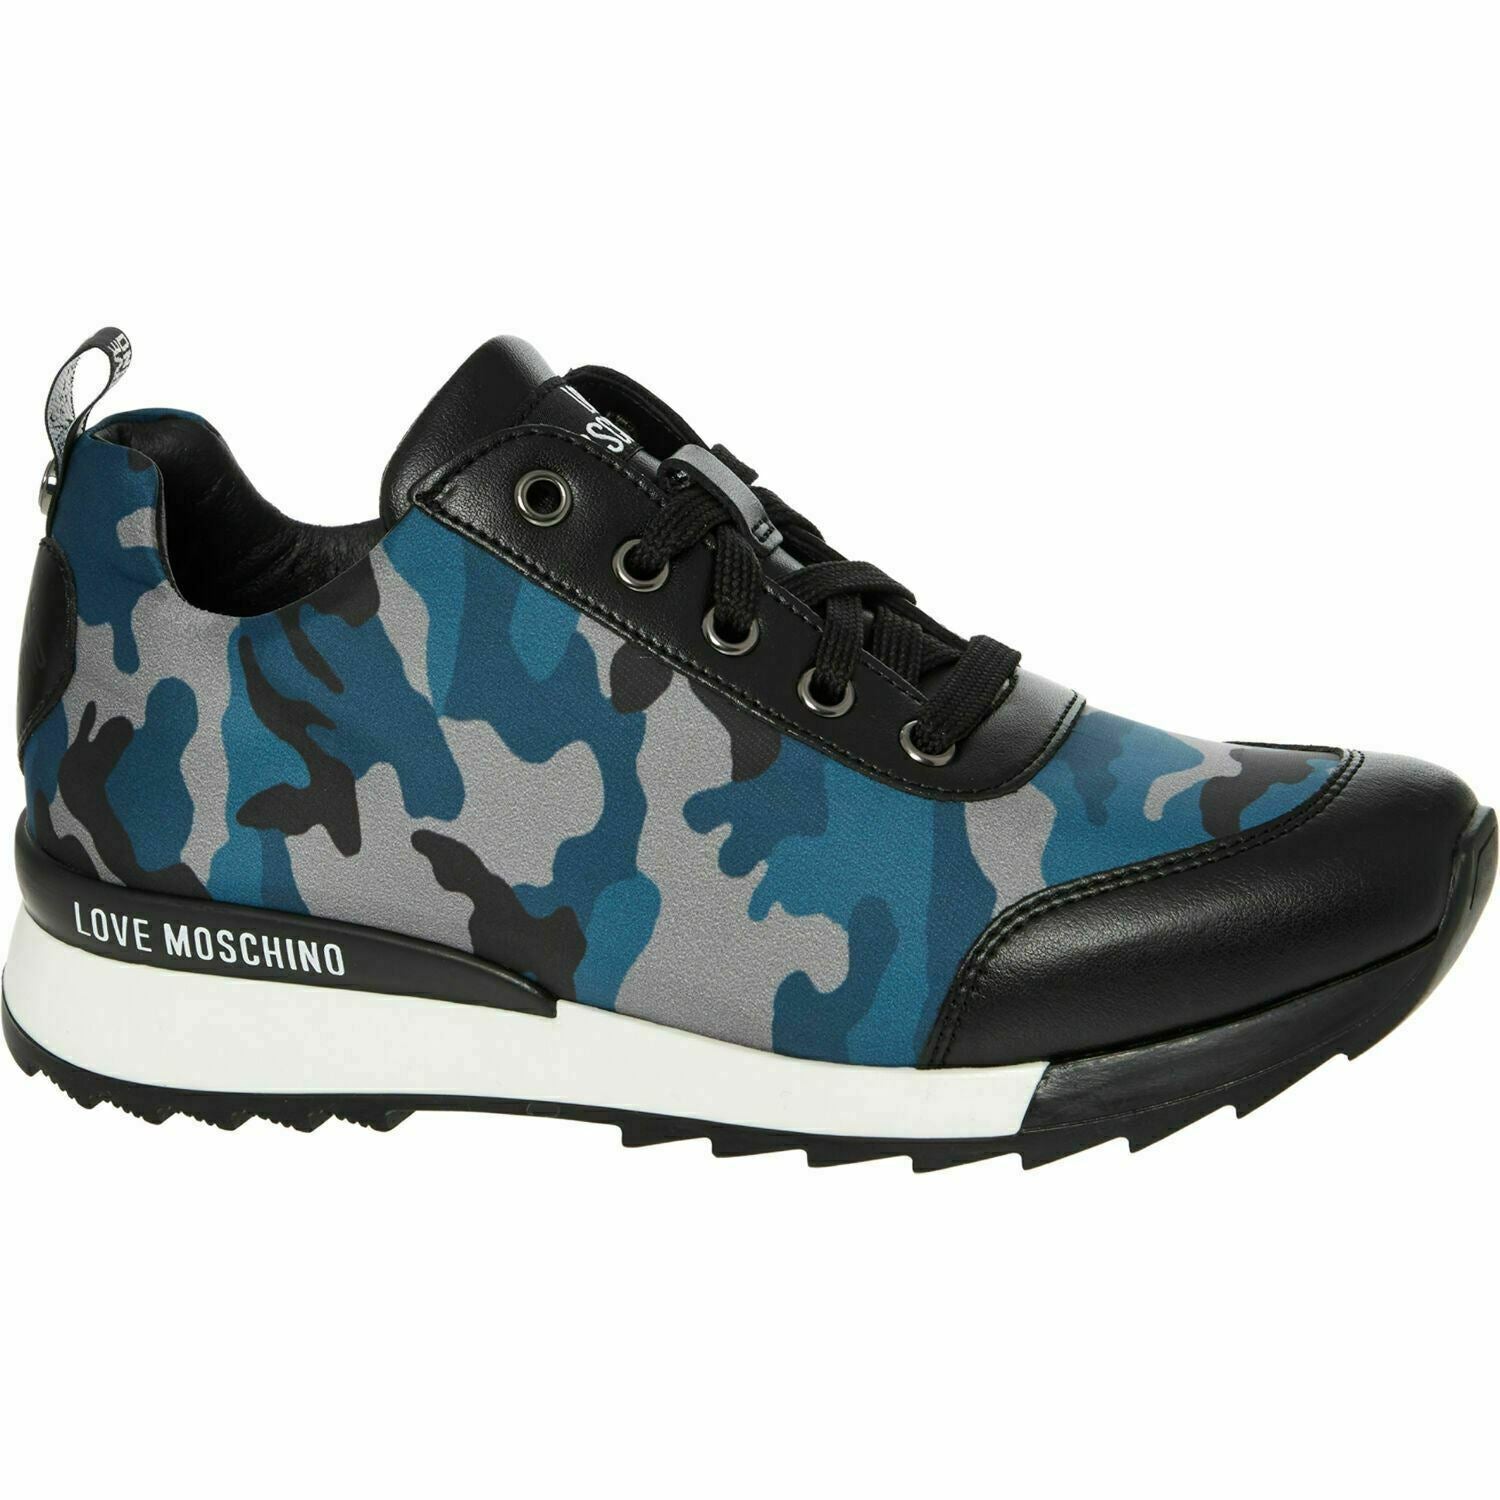 LOVE MOSCHINO Women's Blue Camouflage Print Trainers Shoes, size UK 5 EU 38